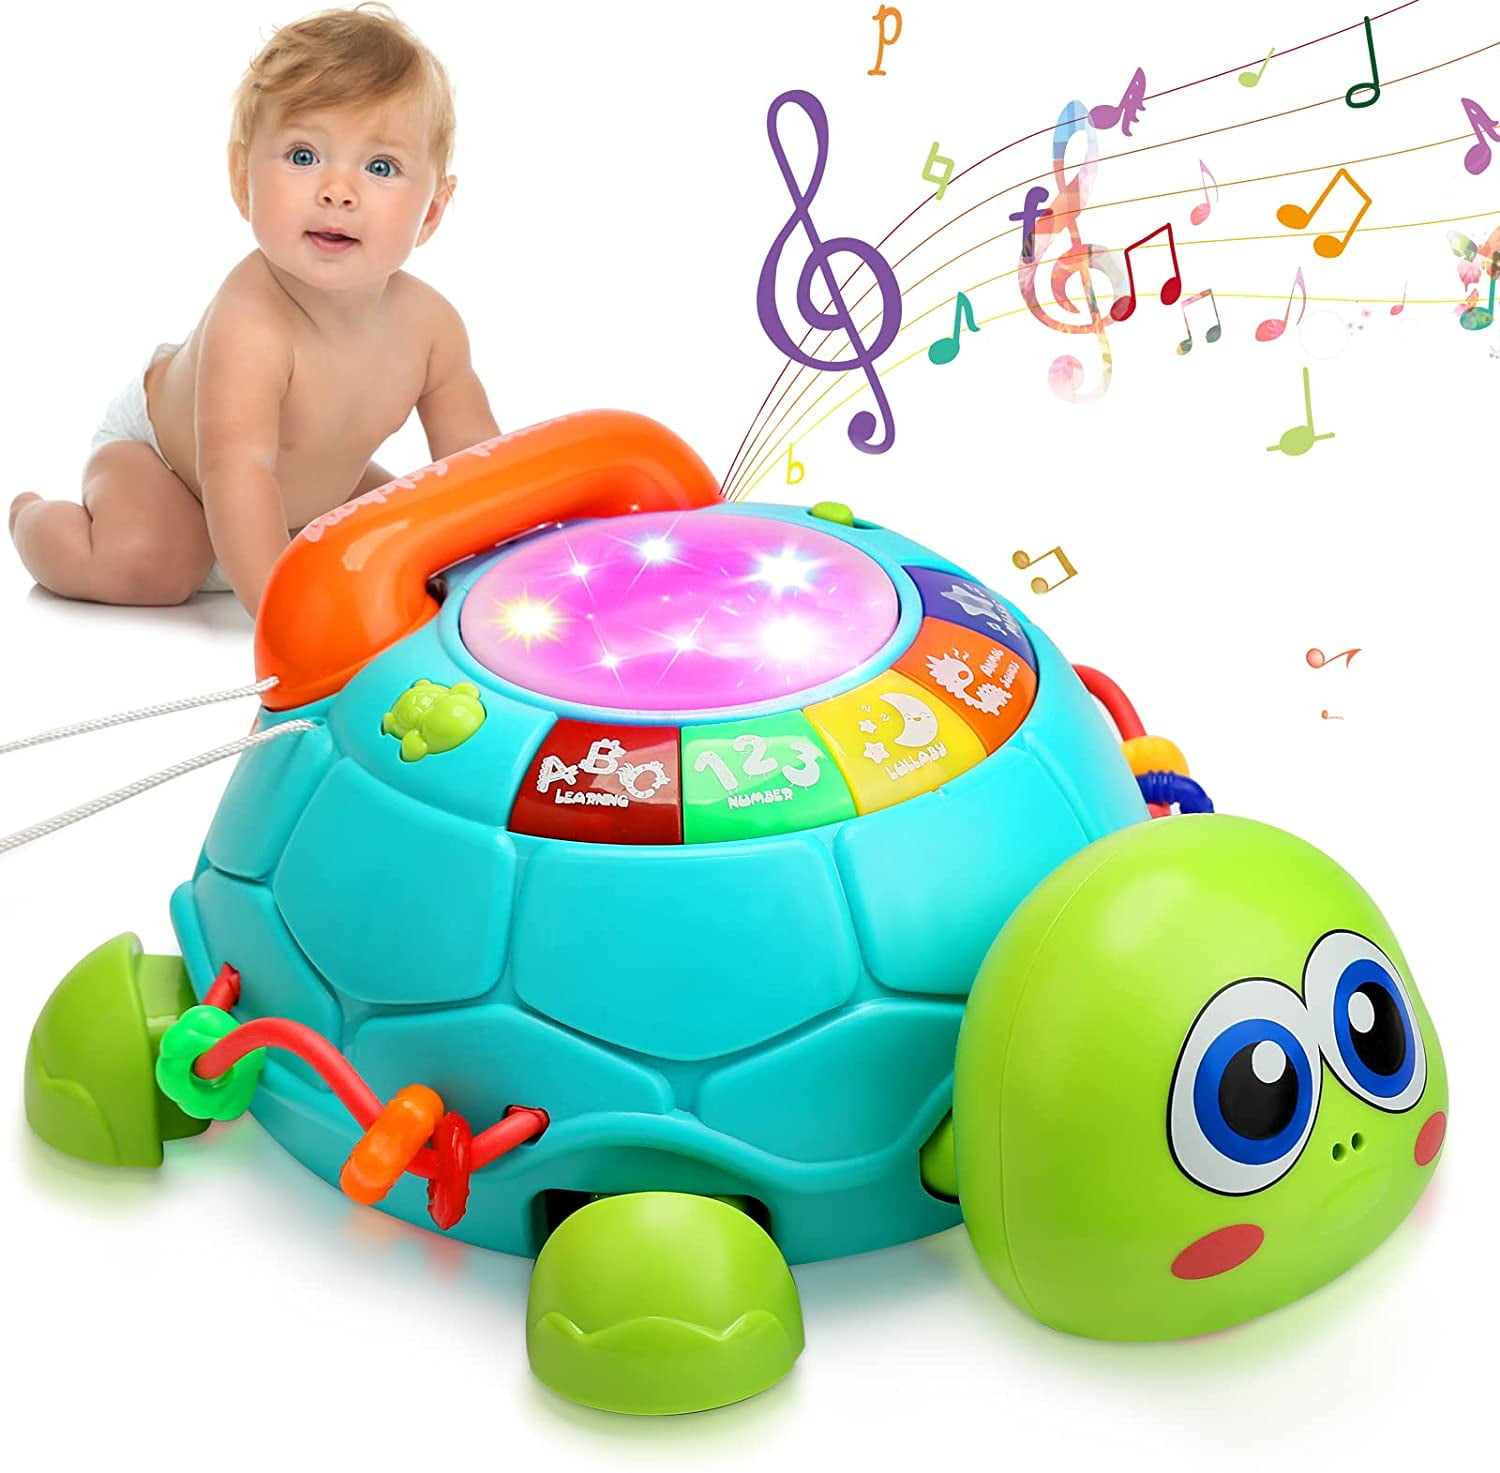 Toddler Girl Toy Educational Play Baby Boy Development Kids Music Learning Game 